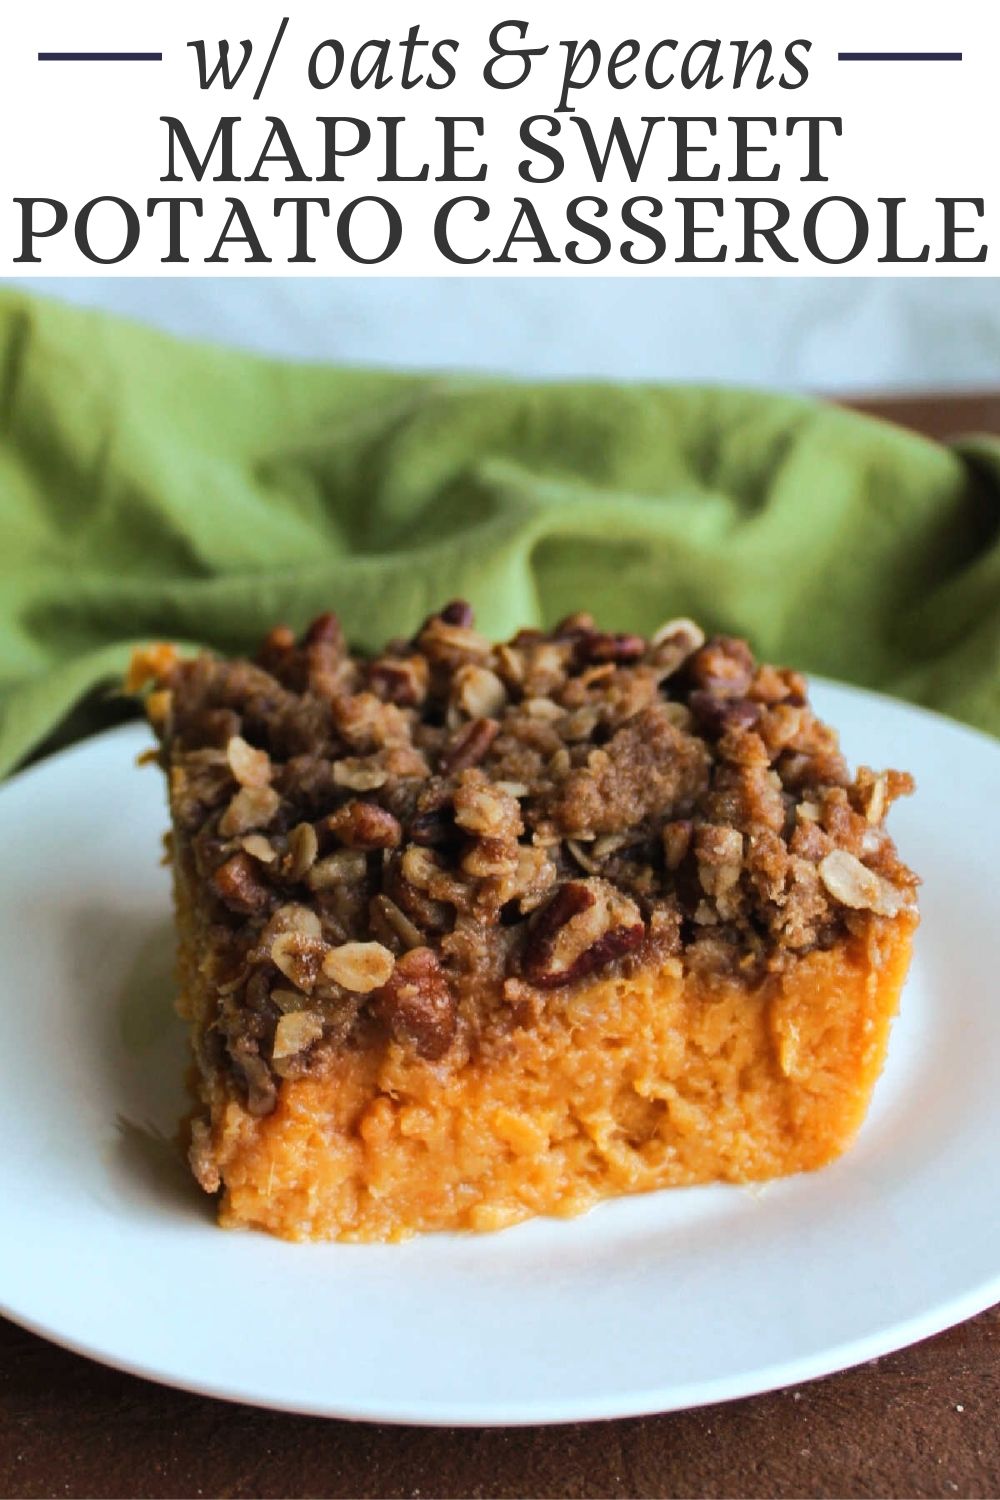 This sweet potato casserole recipe has a smooth maple kissed filling topped with a perfectly crumbly and filled with oats and pecans. It goes perfectly with turkey or ham, making it a fabulous addition to your holiday menus. 